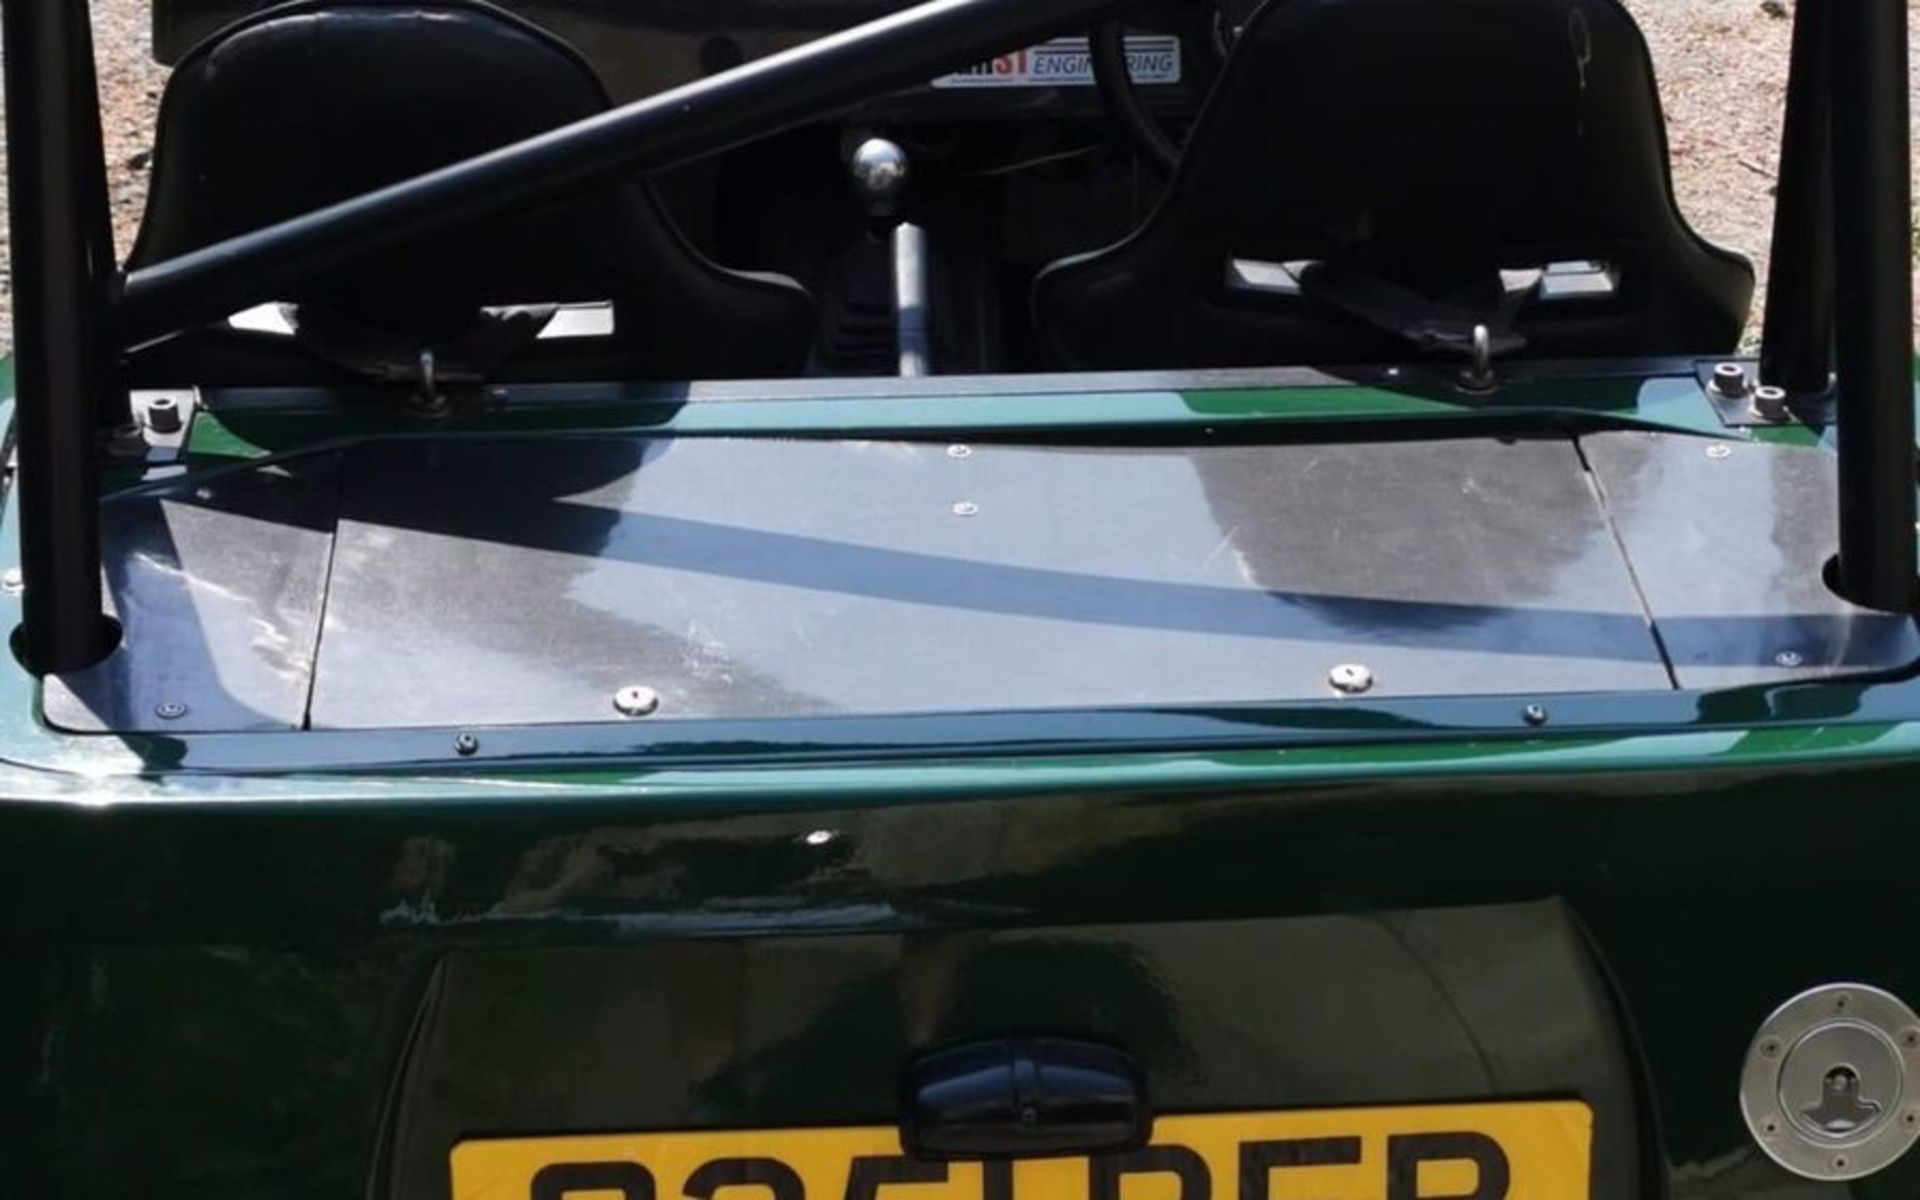 1998 Westfield Sei Registration number Q351 RFB British racing green over carbon graphic Built - Image 10 of 14